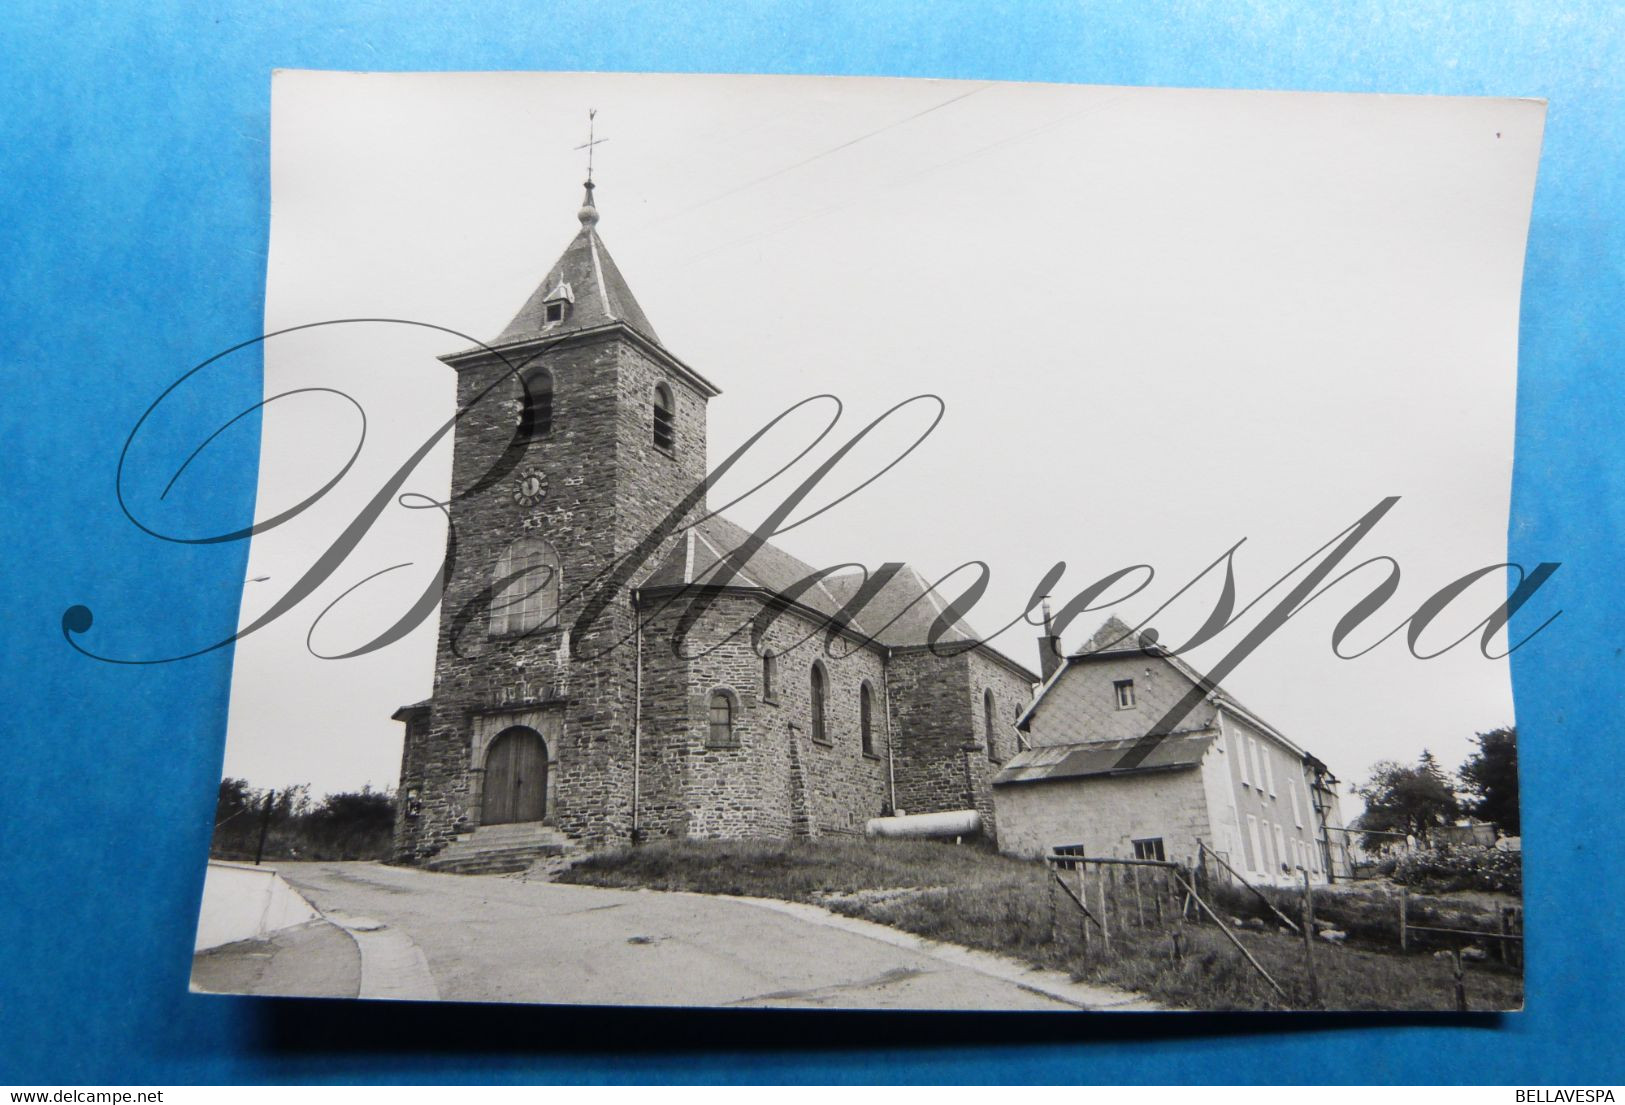 Hollange  (Fauvillers)  Eglise  Foto Privaat Opname Photo Prive, Opname Pris  26-07-1975 - Fauvillers